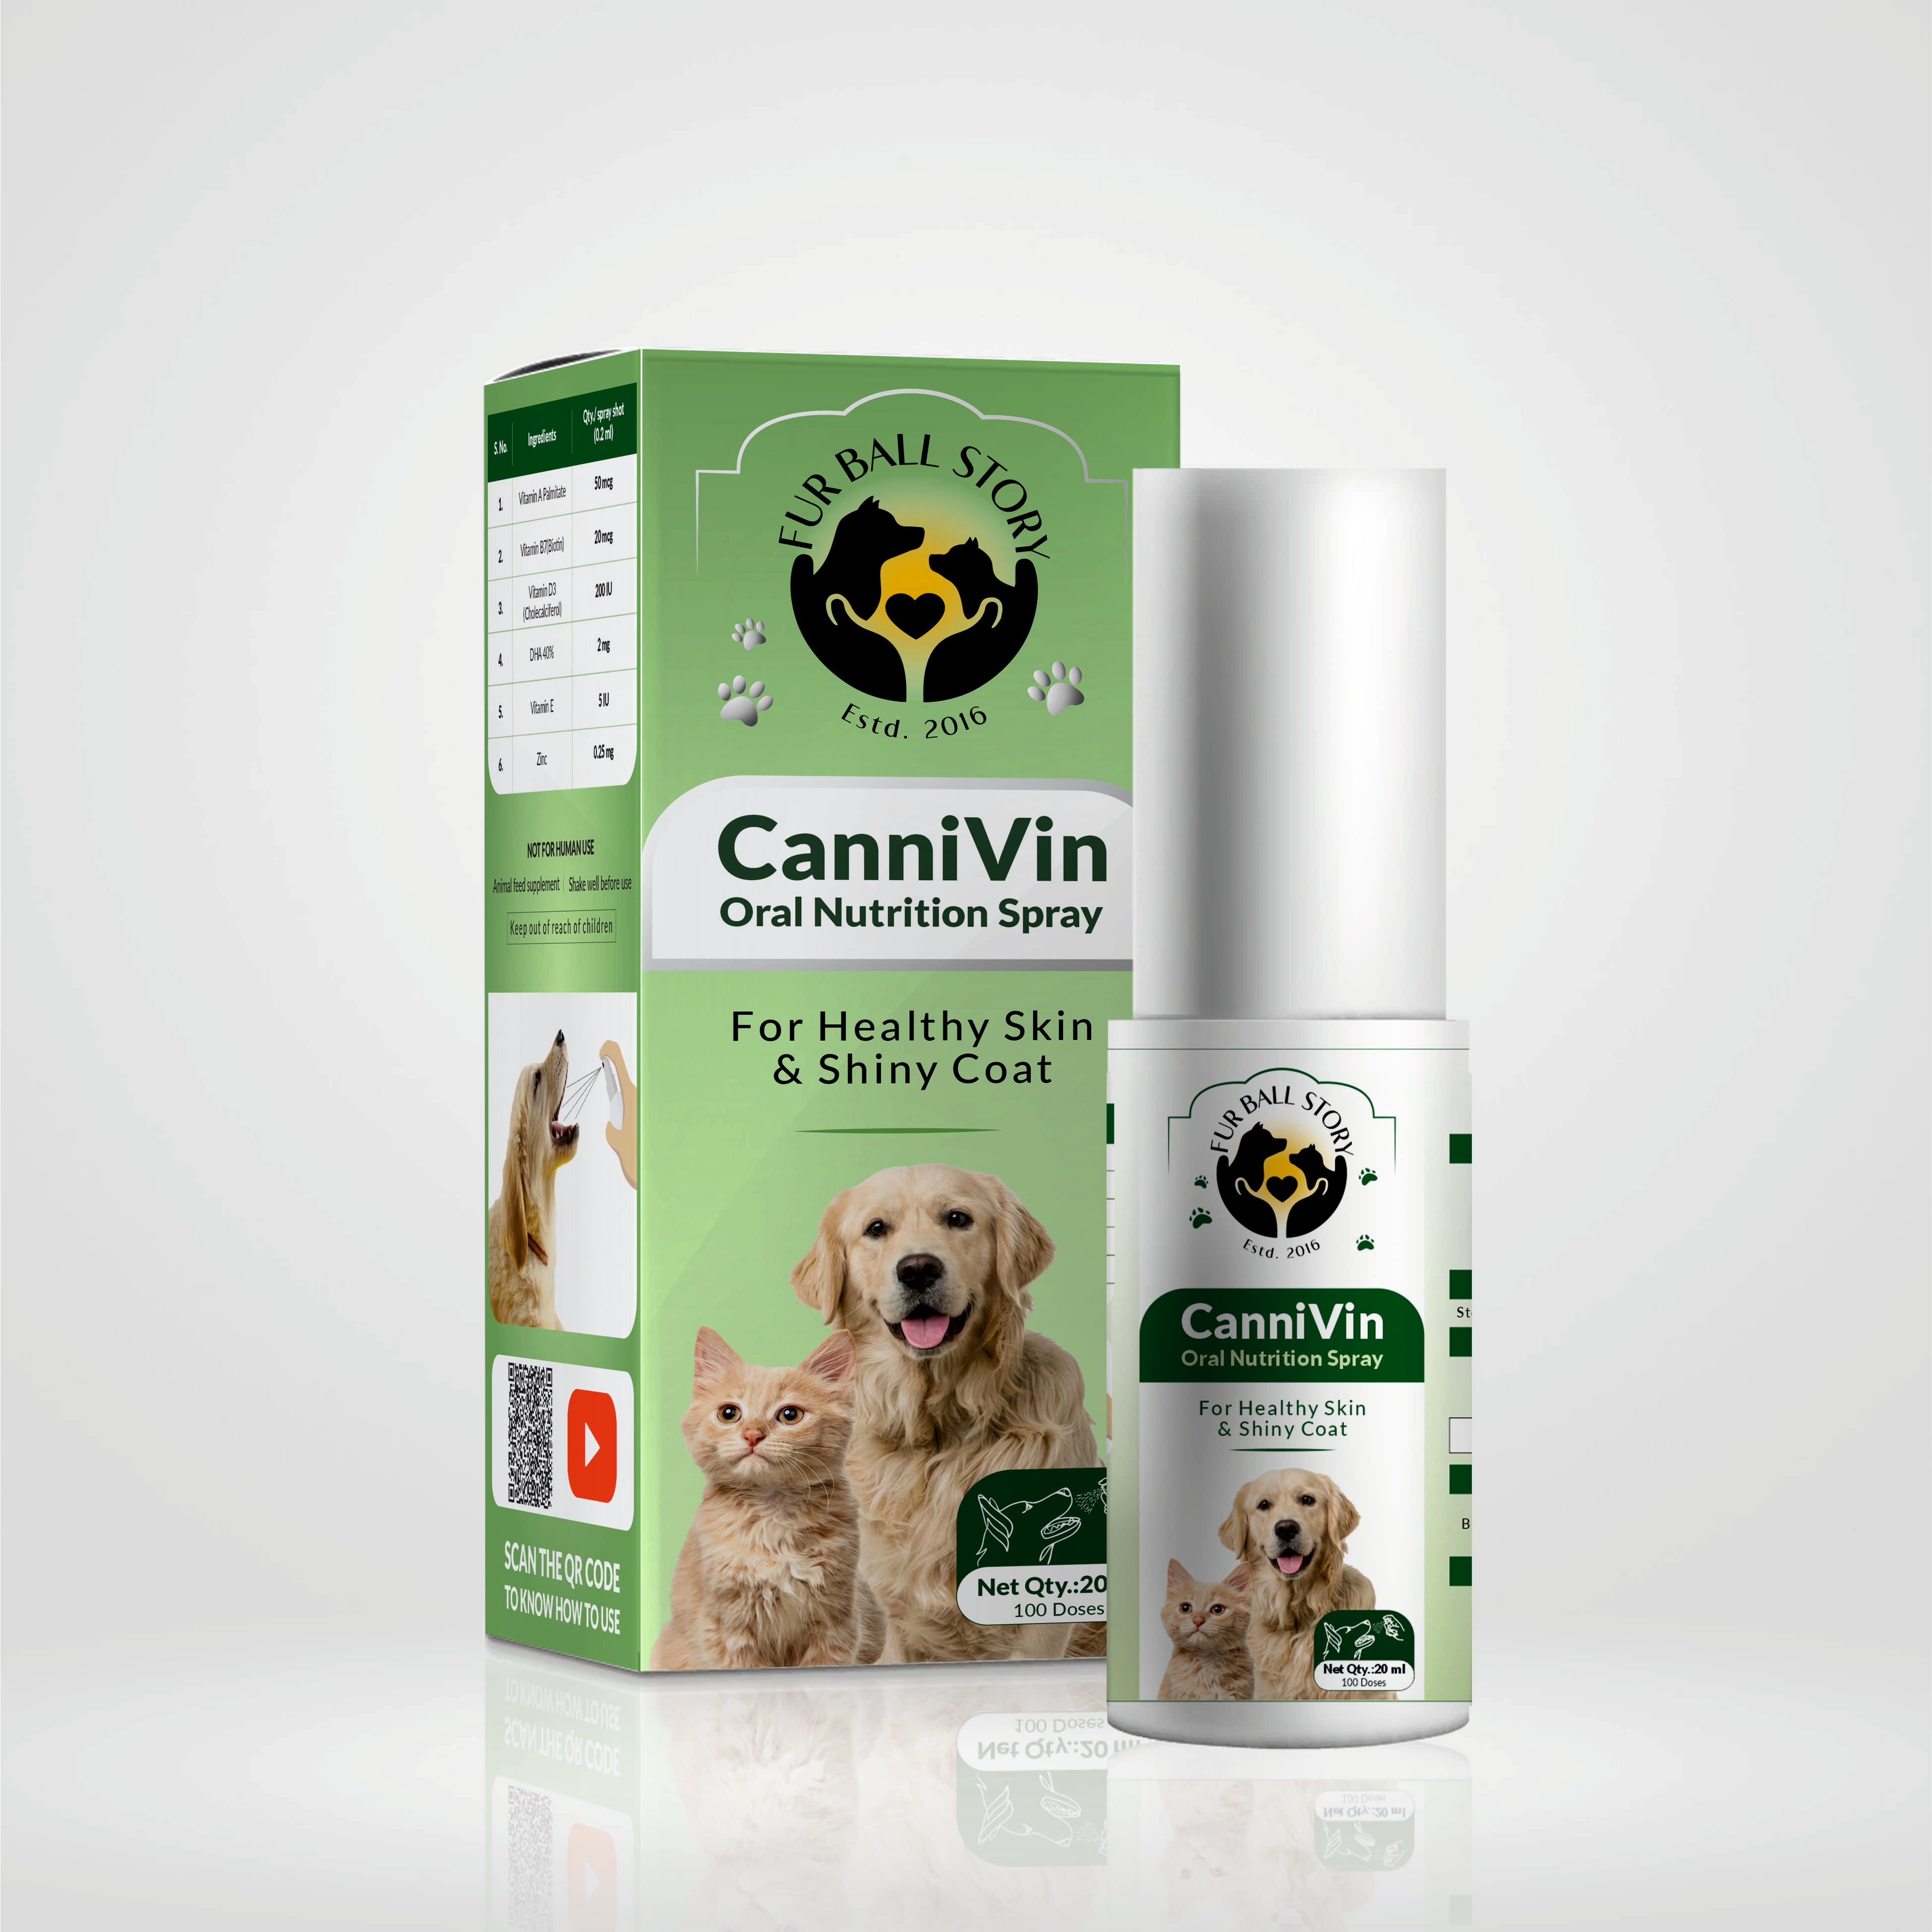 skin & coat supplements for dogs